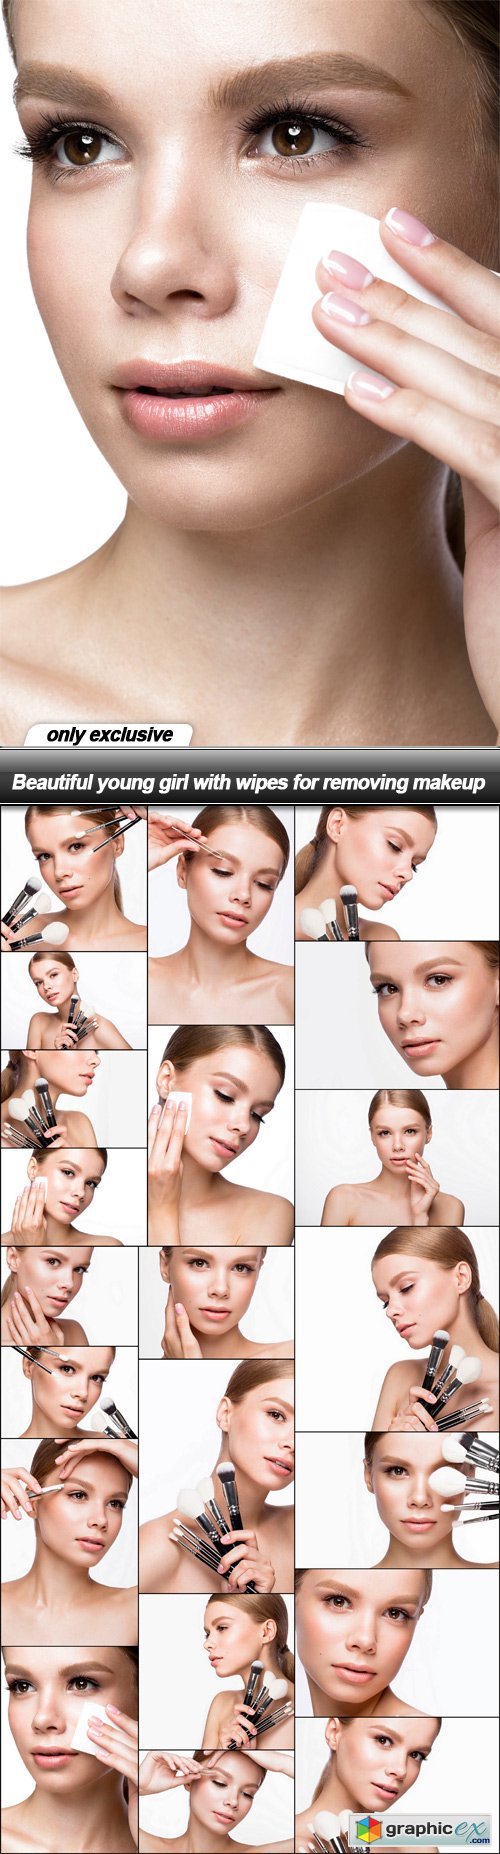 Beautiful young girl with wipes for removing makeup - 21 UHQ JPEG